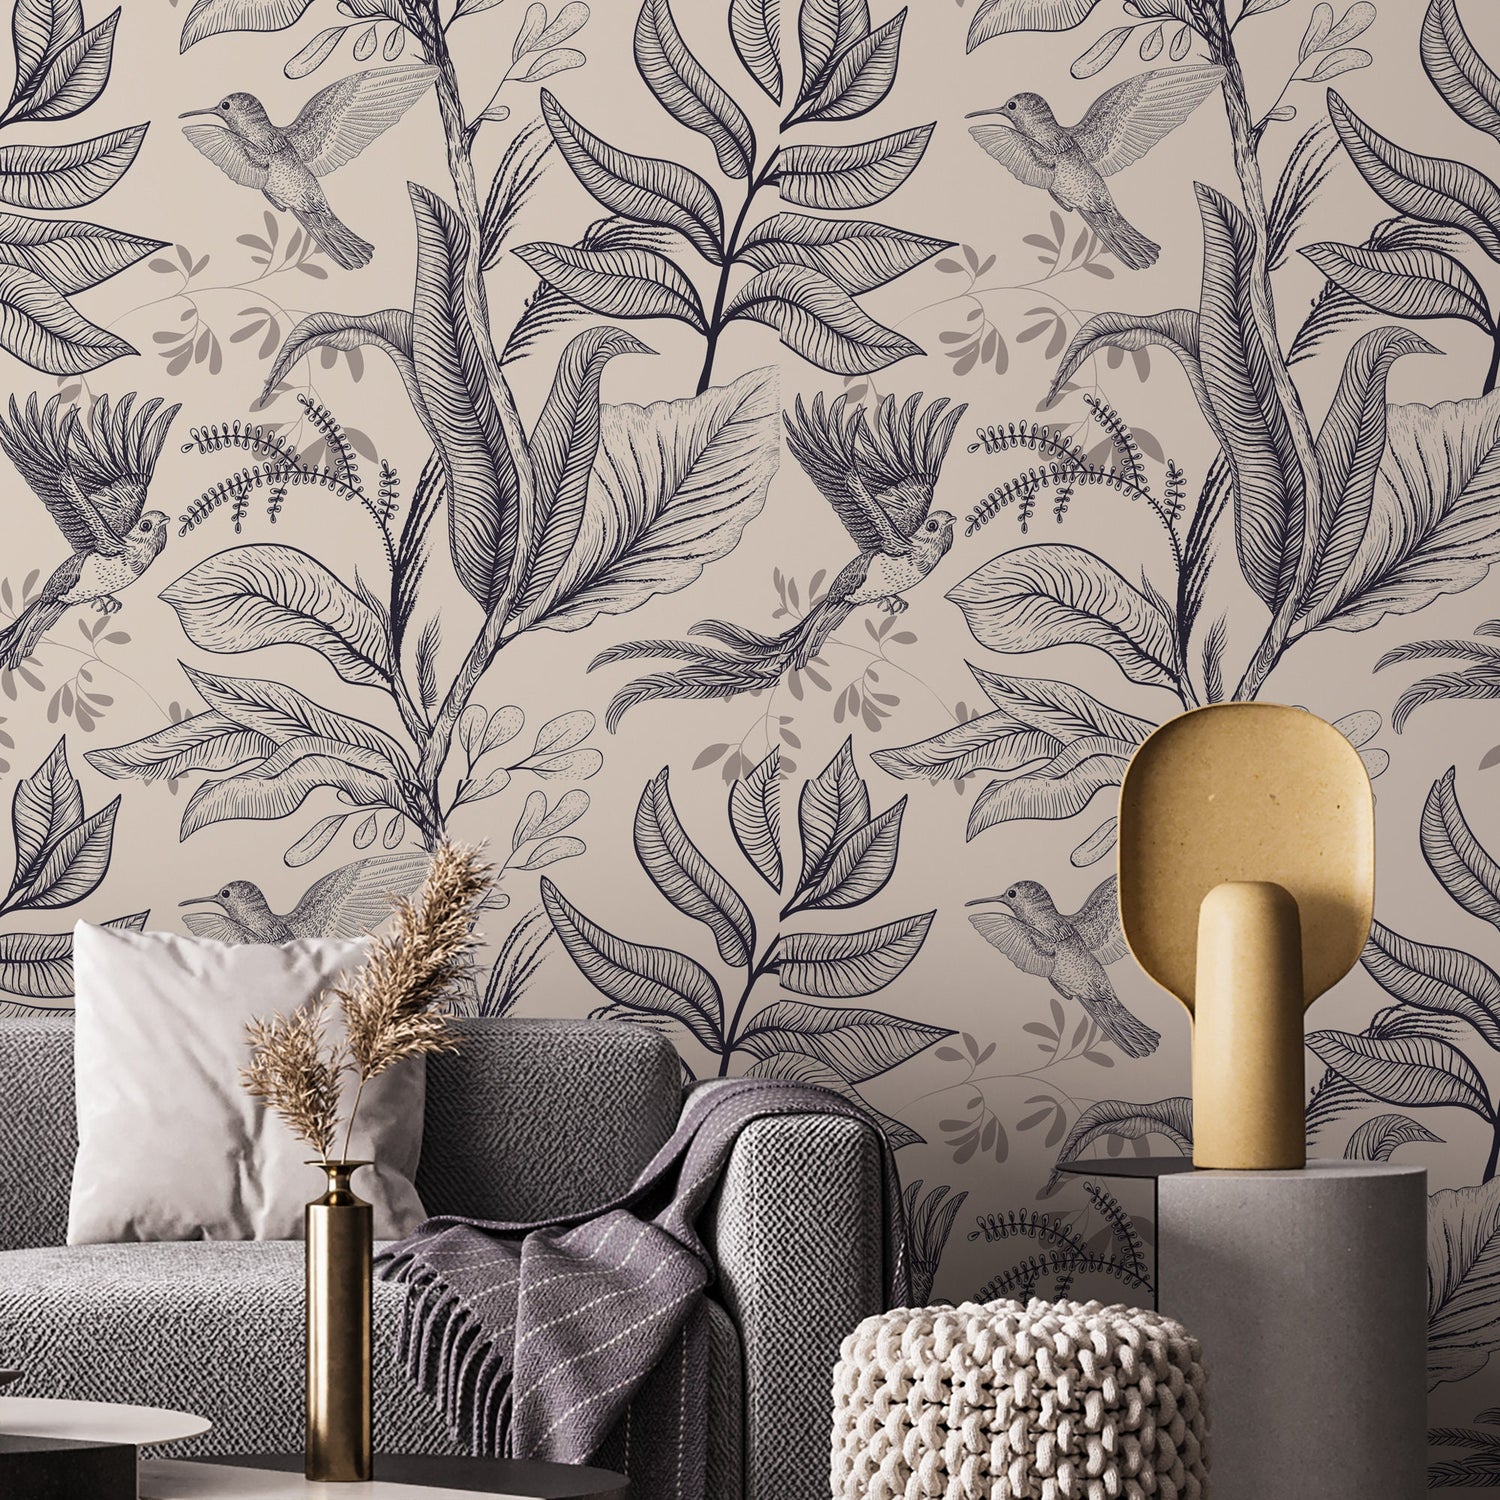 Chinoiserie wallpaper with birds, boho style botanical mural, peel and stick or traditional wallpaper